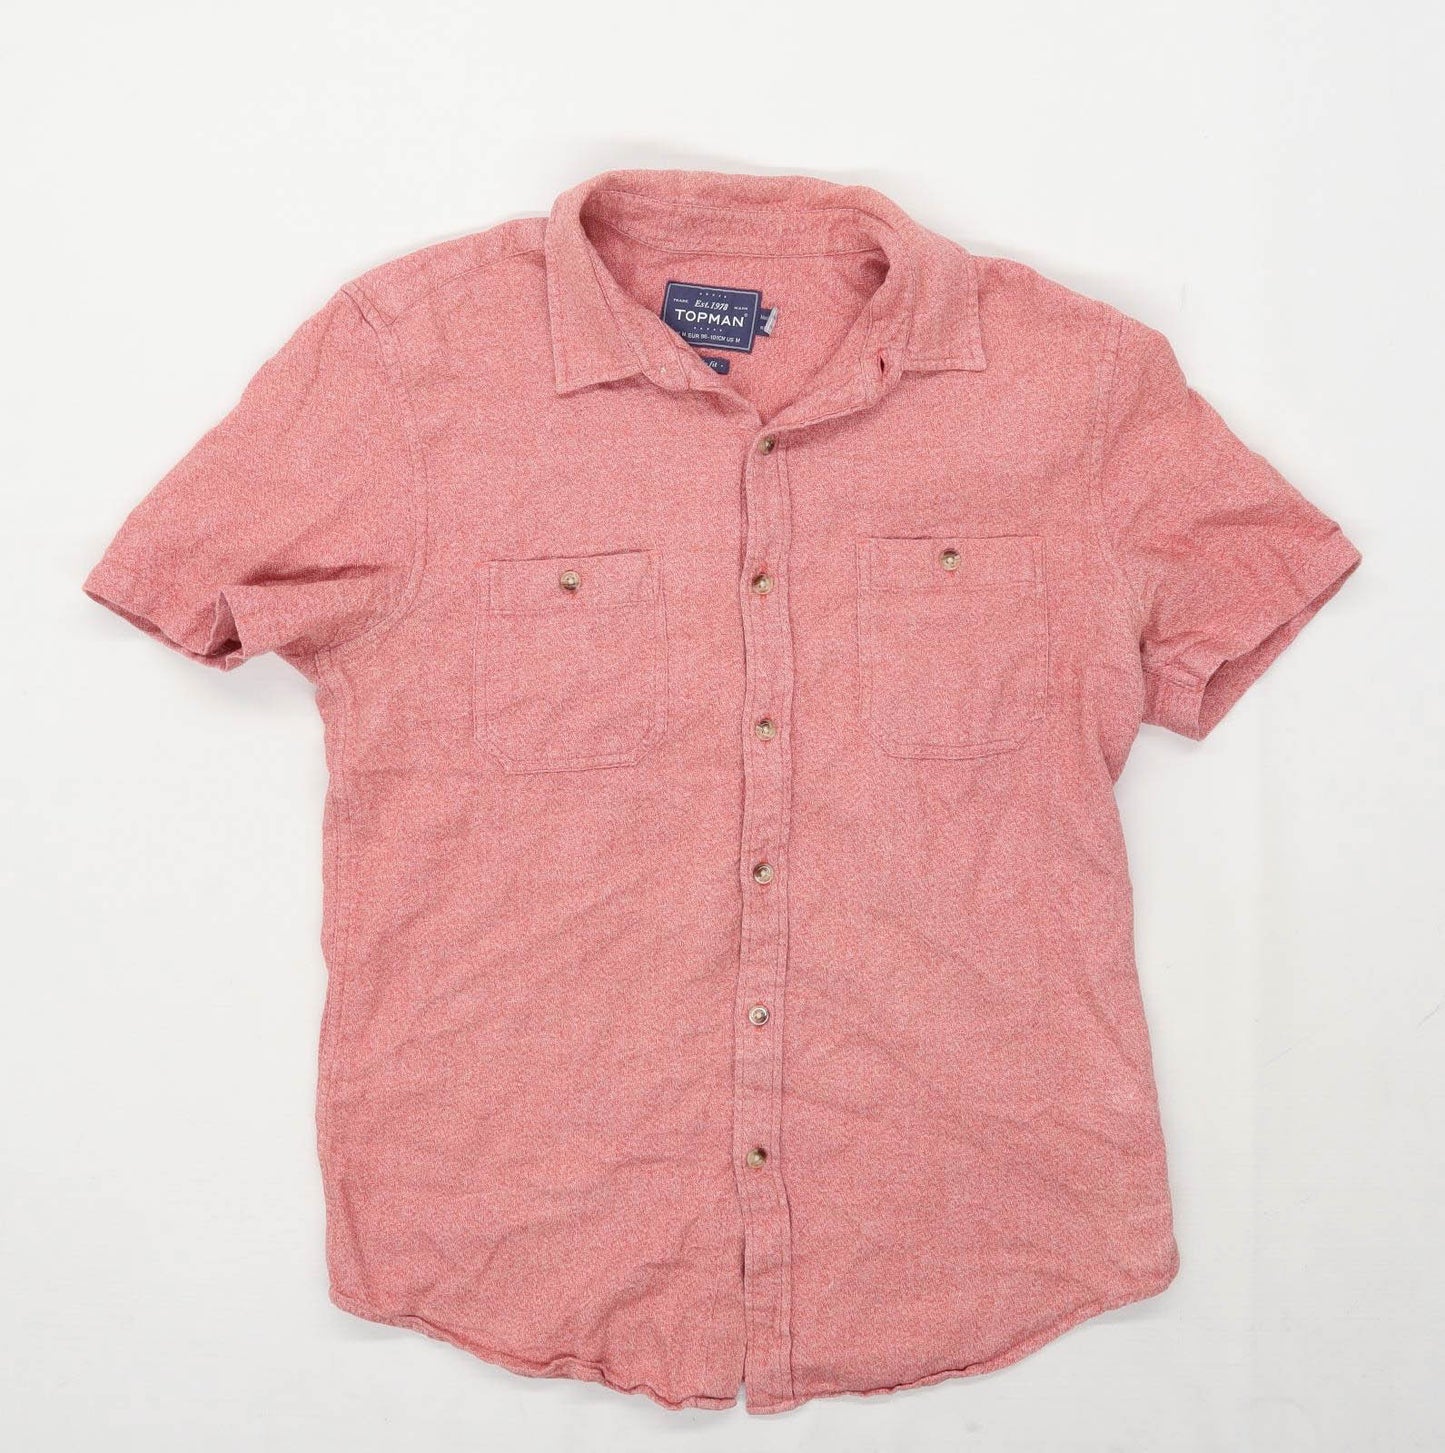 Topman Mens Size M Cotton Textured Red Casual Shirt